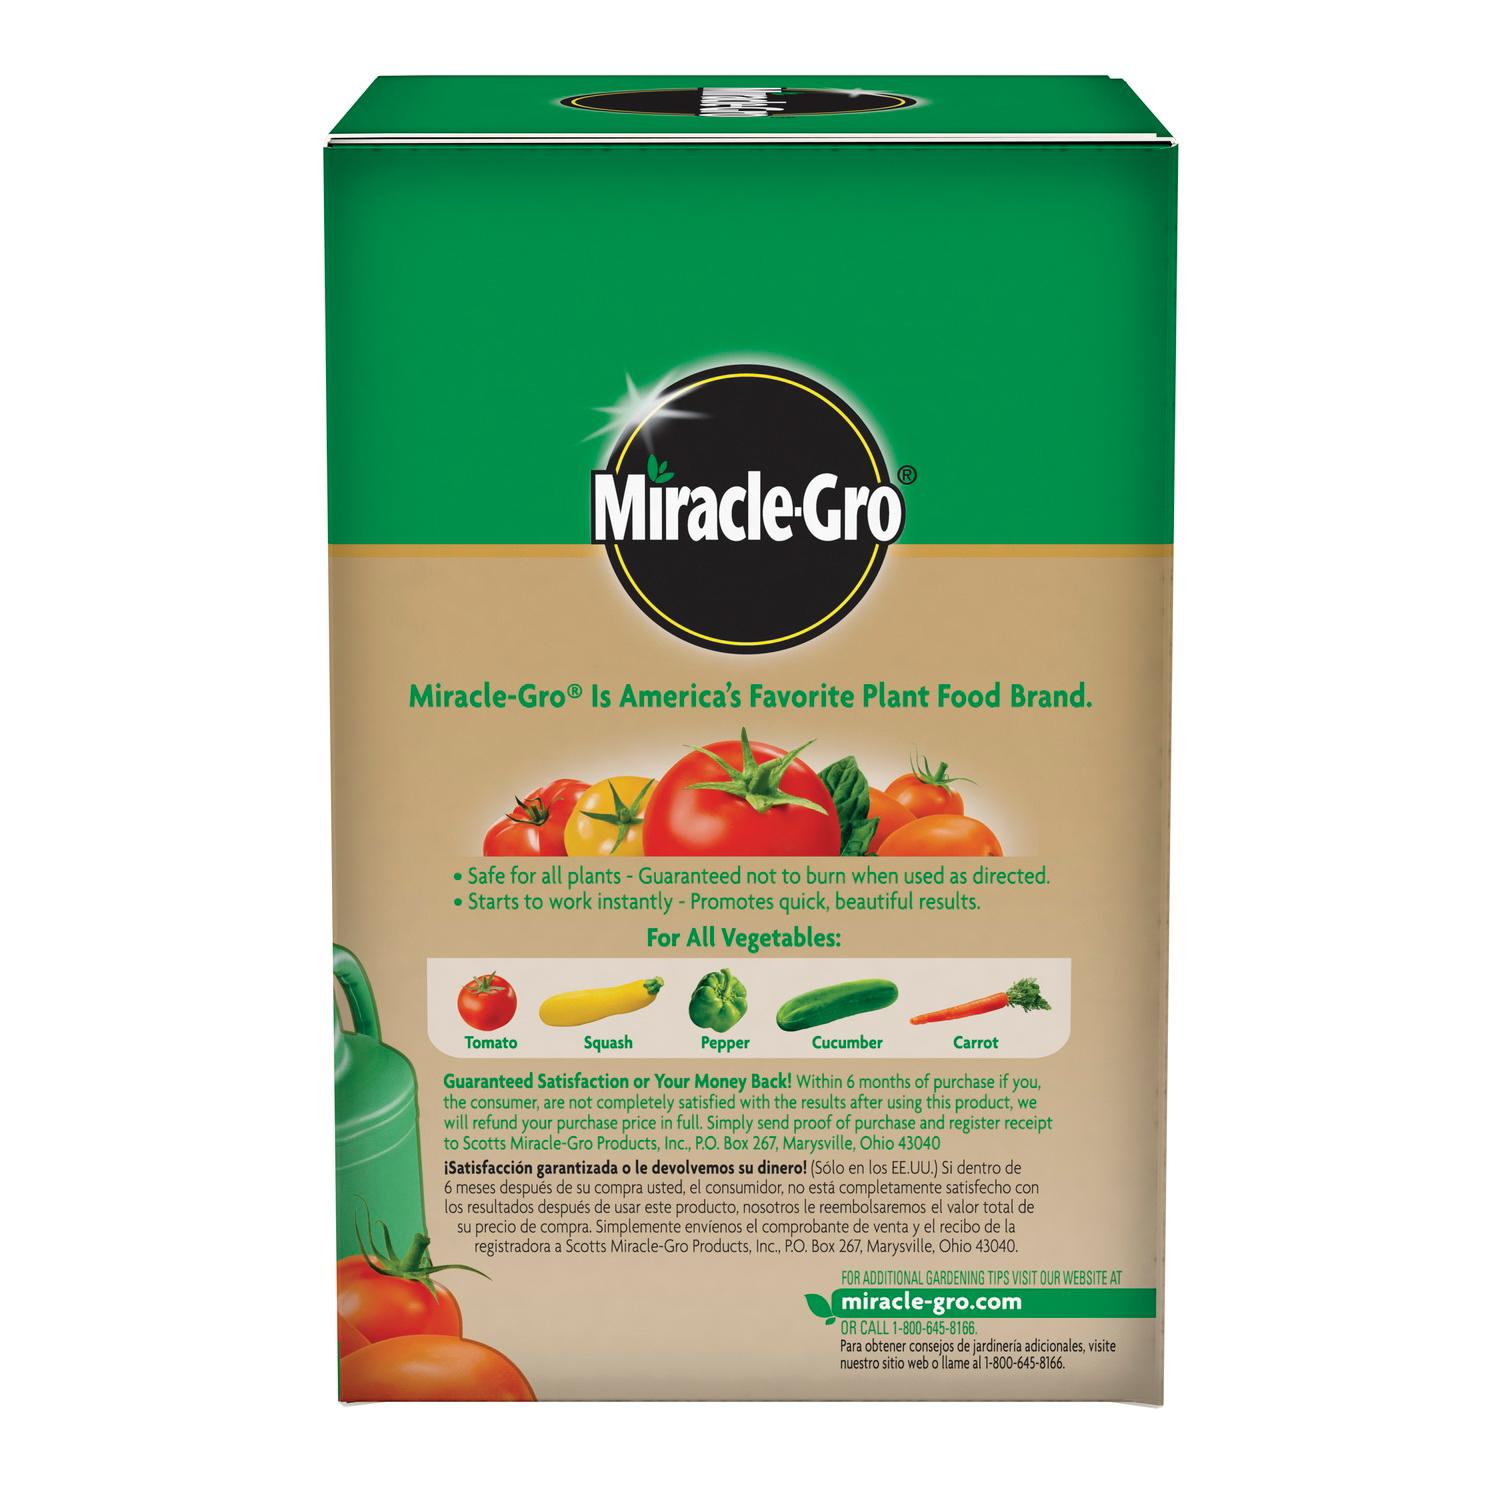 Miracle-Gro 2000422 Plant Food, 1.5 lb Box, Solid, 18-18-21 N-P-K Ratio - 3